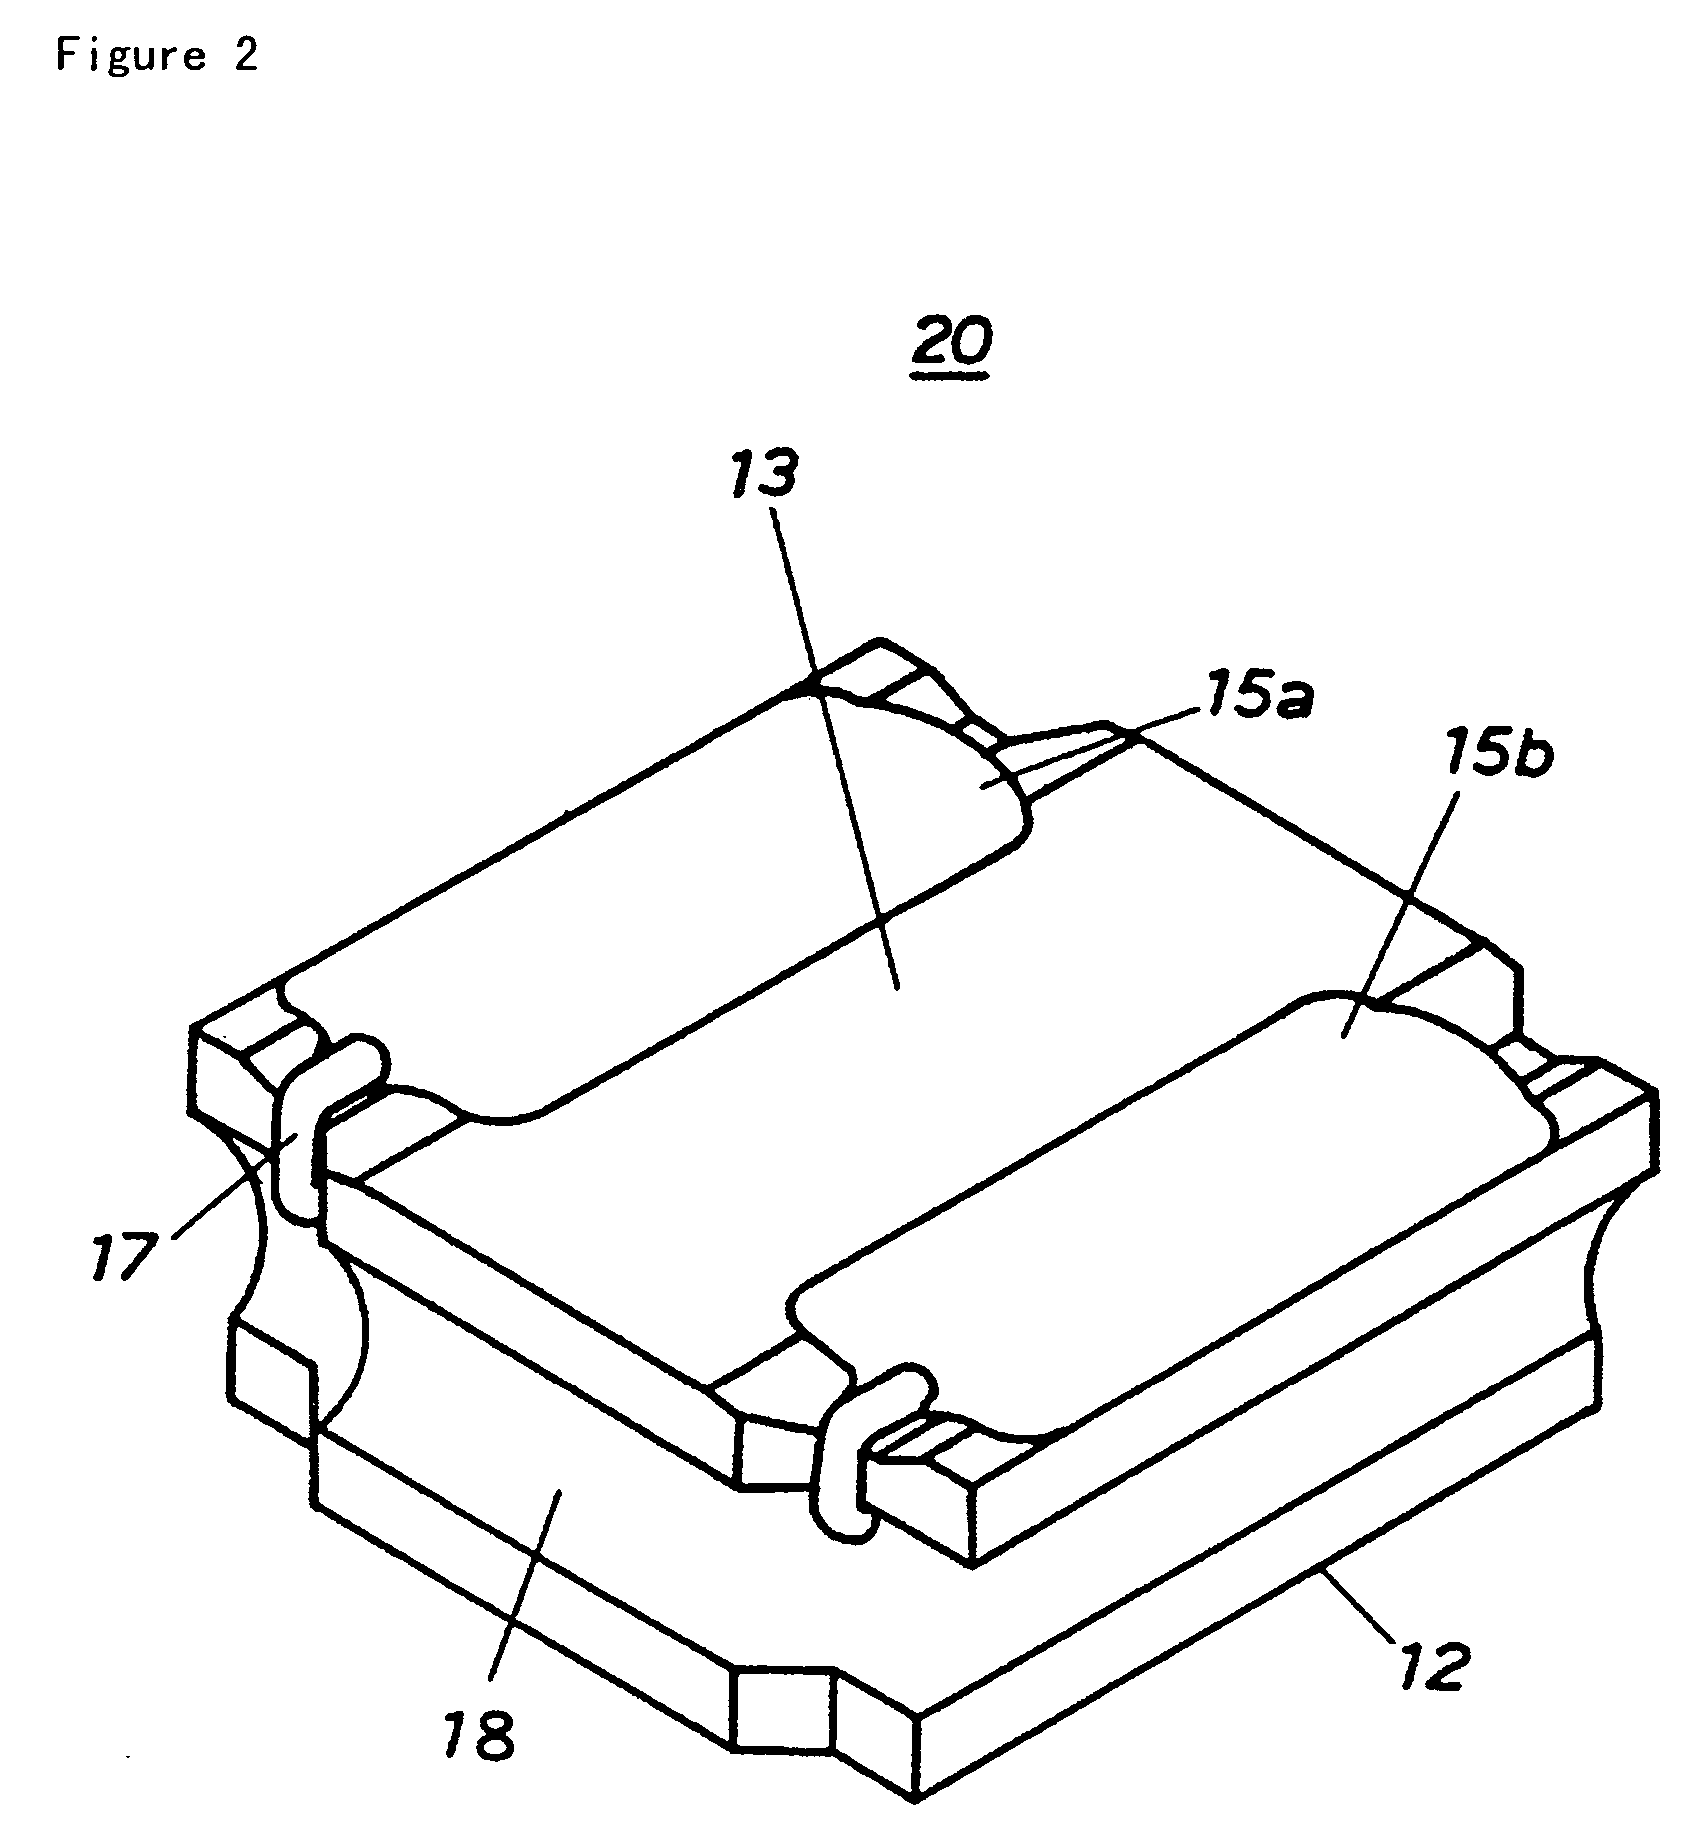 Surface-mounting coil component and method of producing the same